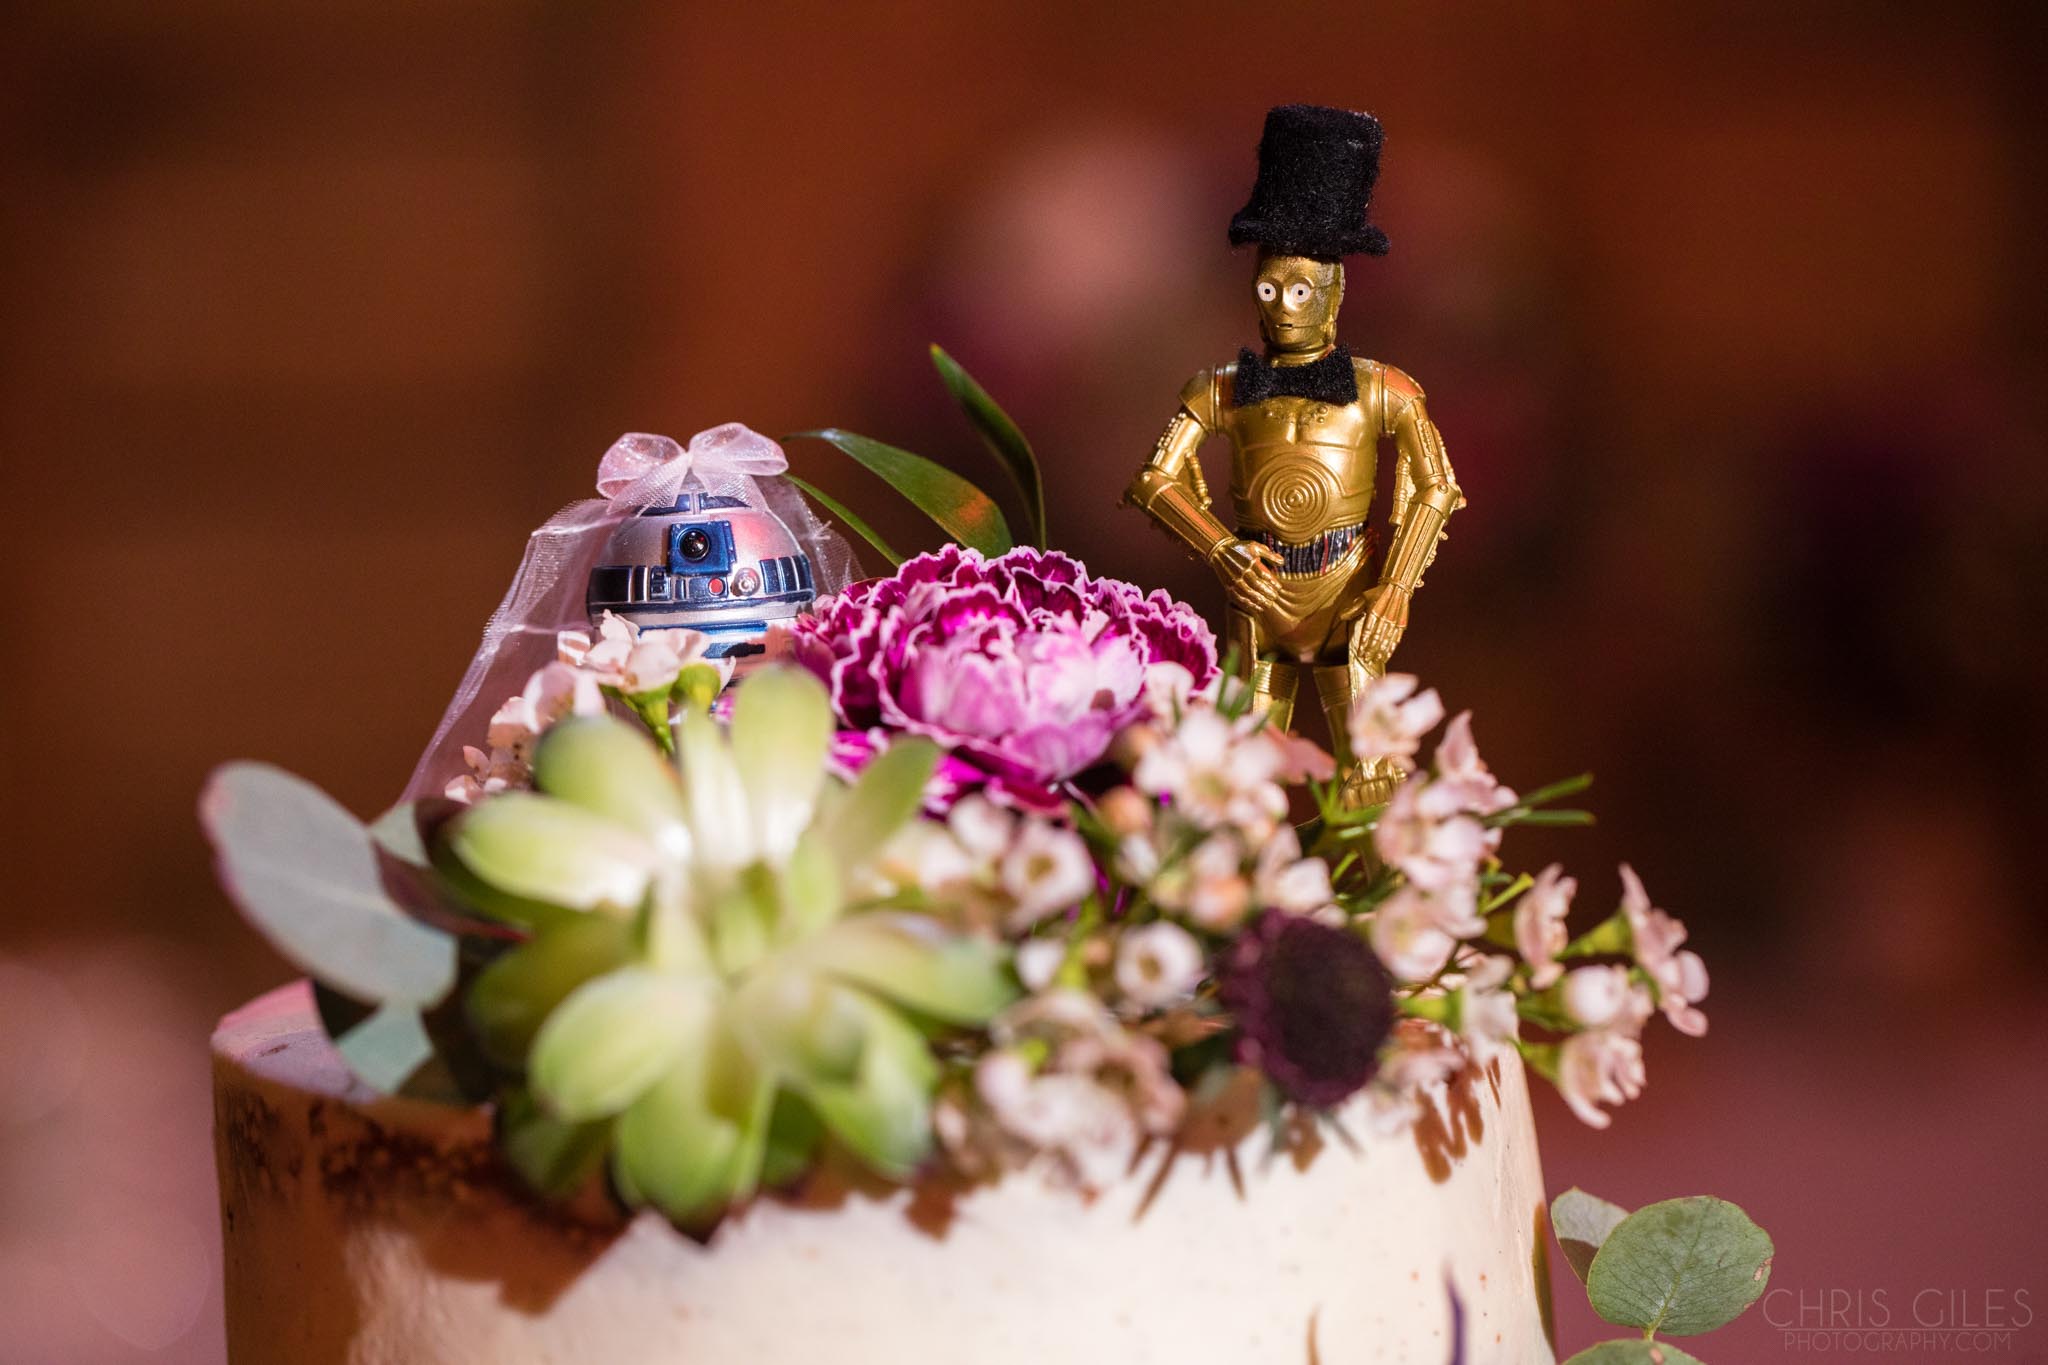 Star Wars Wedding Cake Toppers R2D2 and C3PO